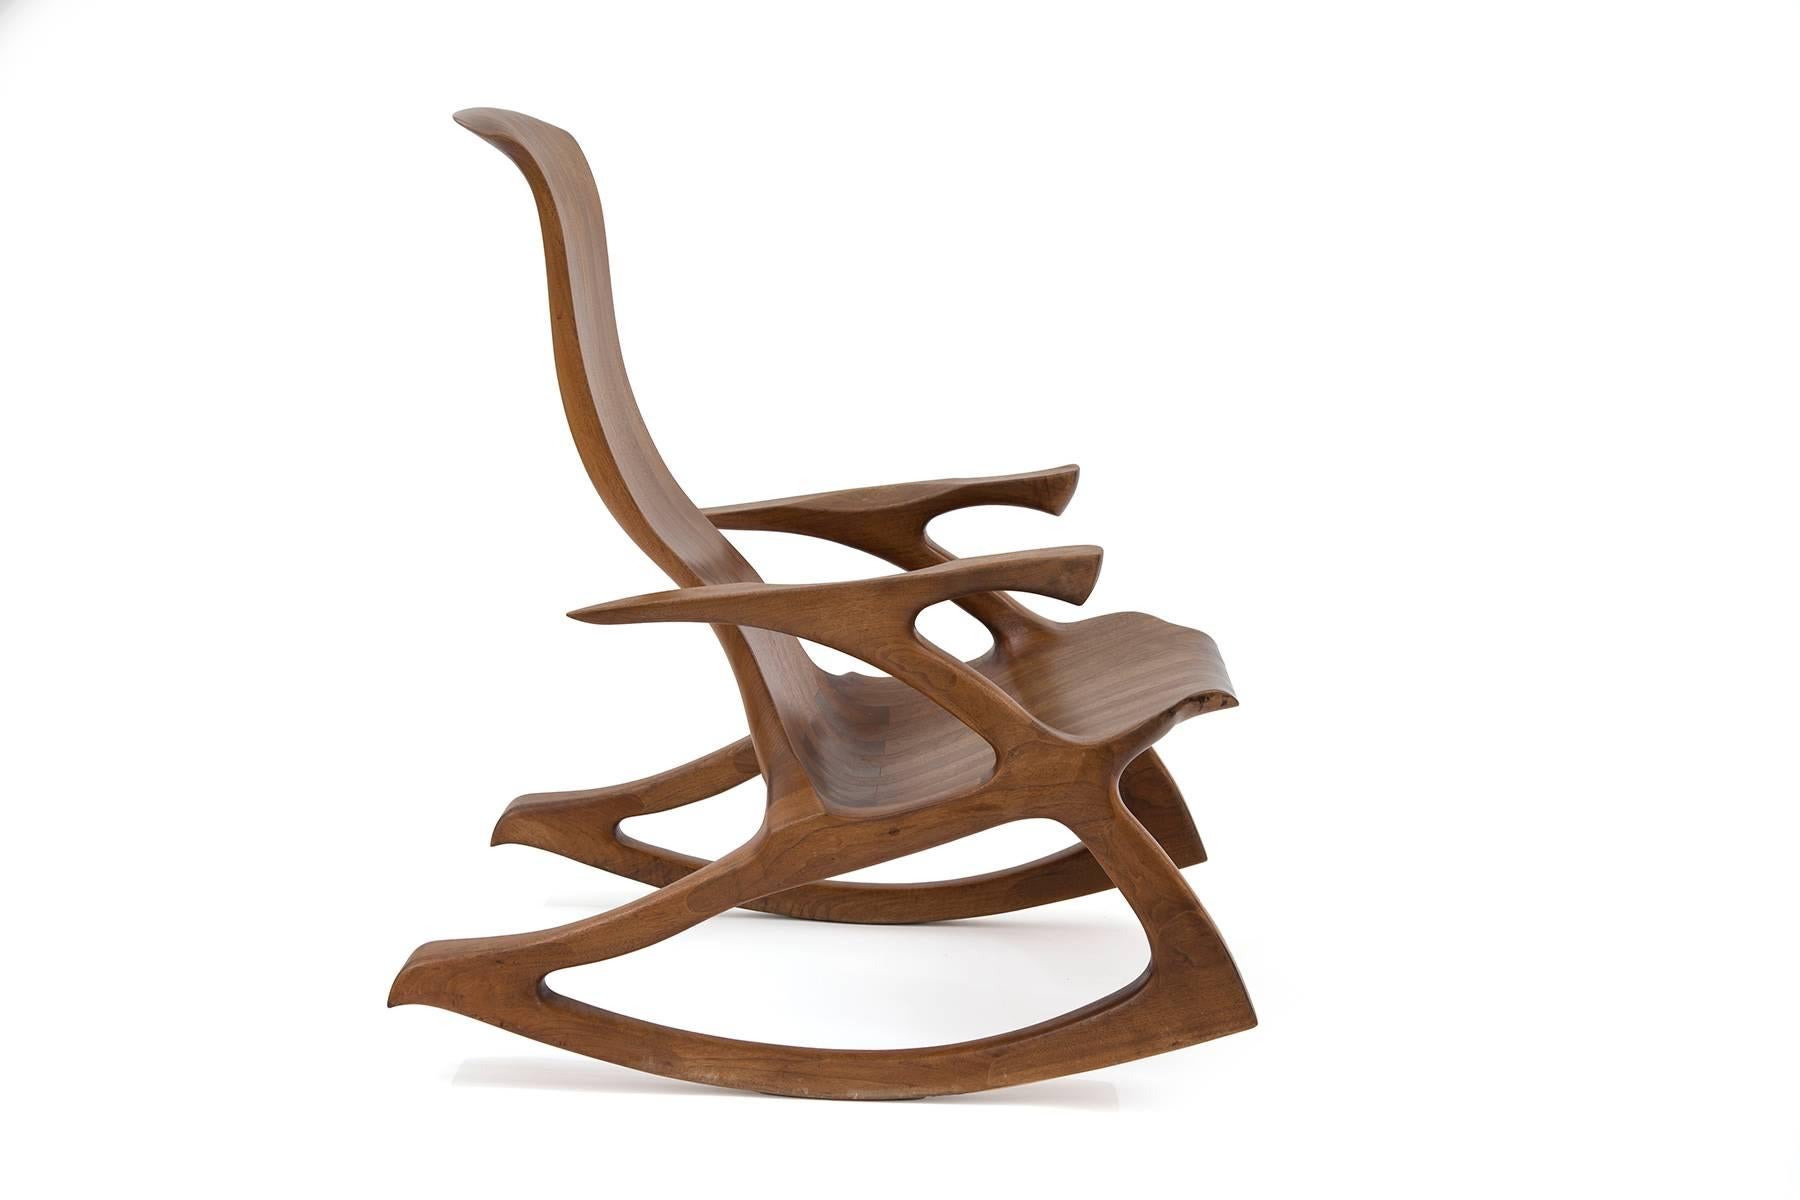 Solid walnut studio crafted rocking chair. This example has sculpted arms and frame with inset dove tailing and subtly curved back. Looks incredible from every angle.